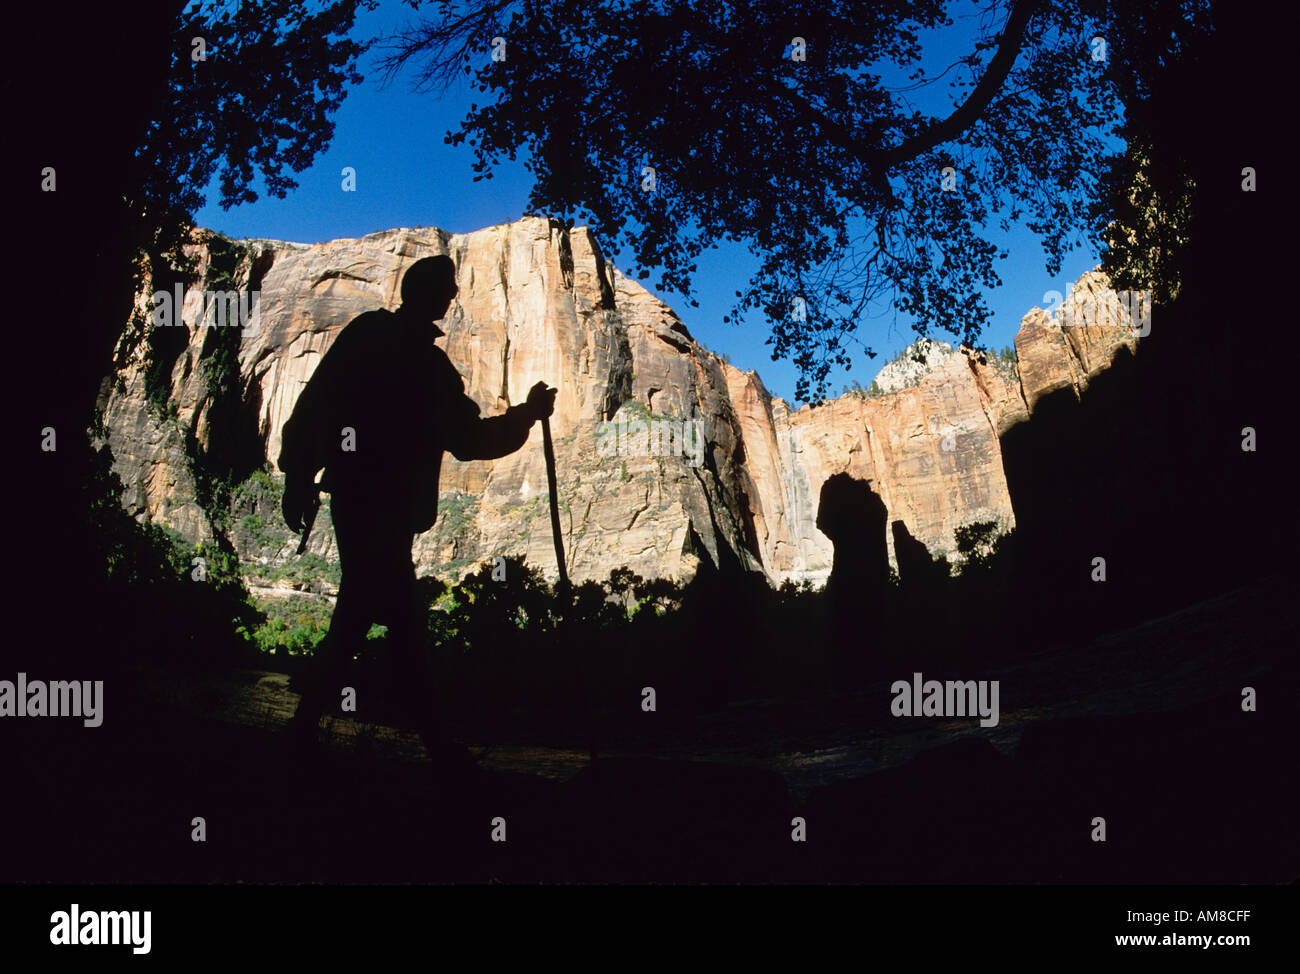 Sport Sports Hiking in Zion National Park Utah USA Stock Photo